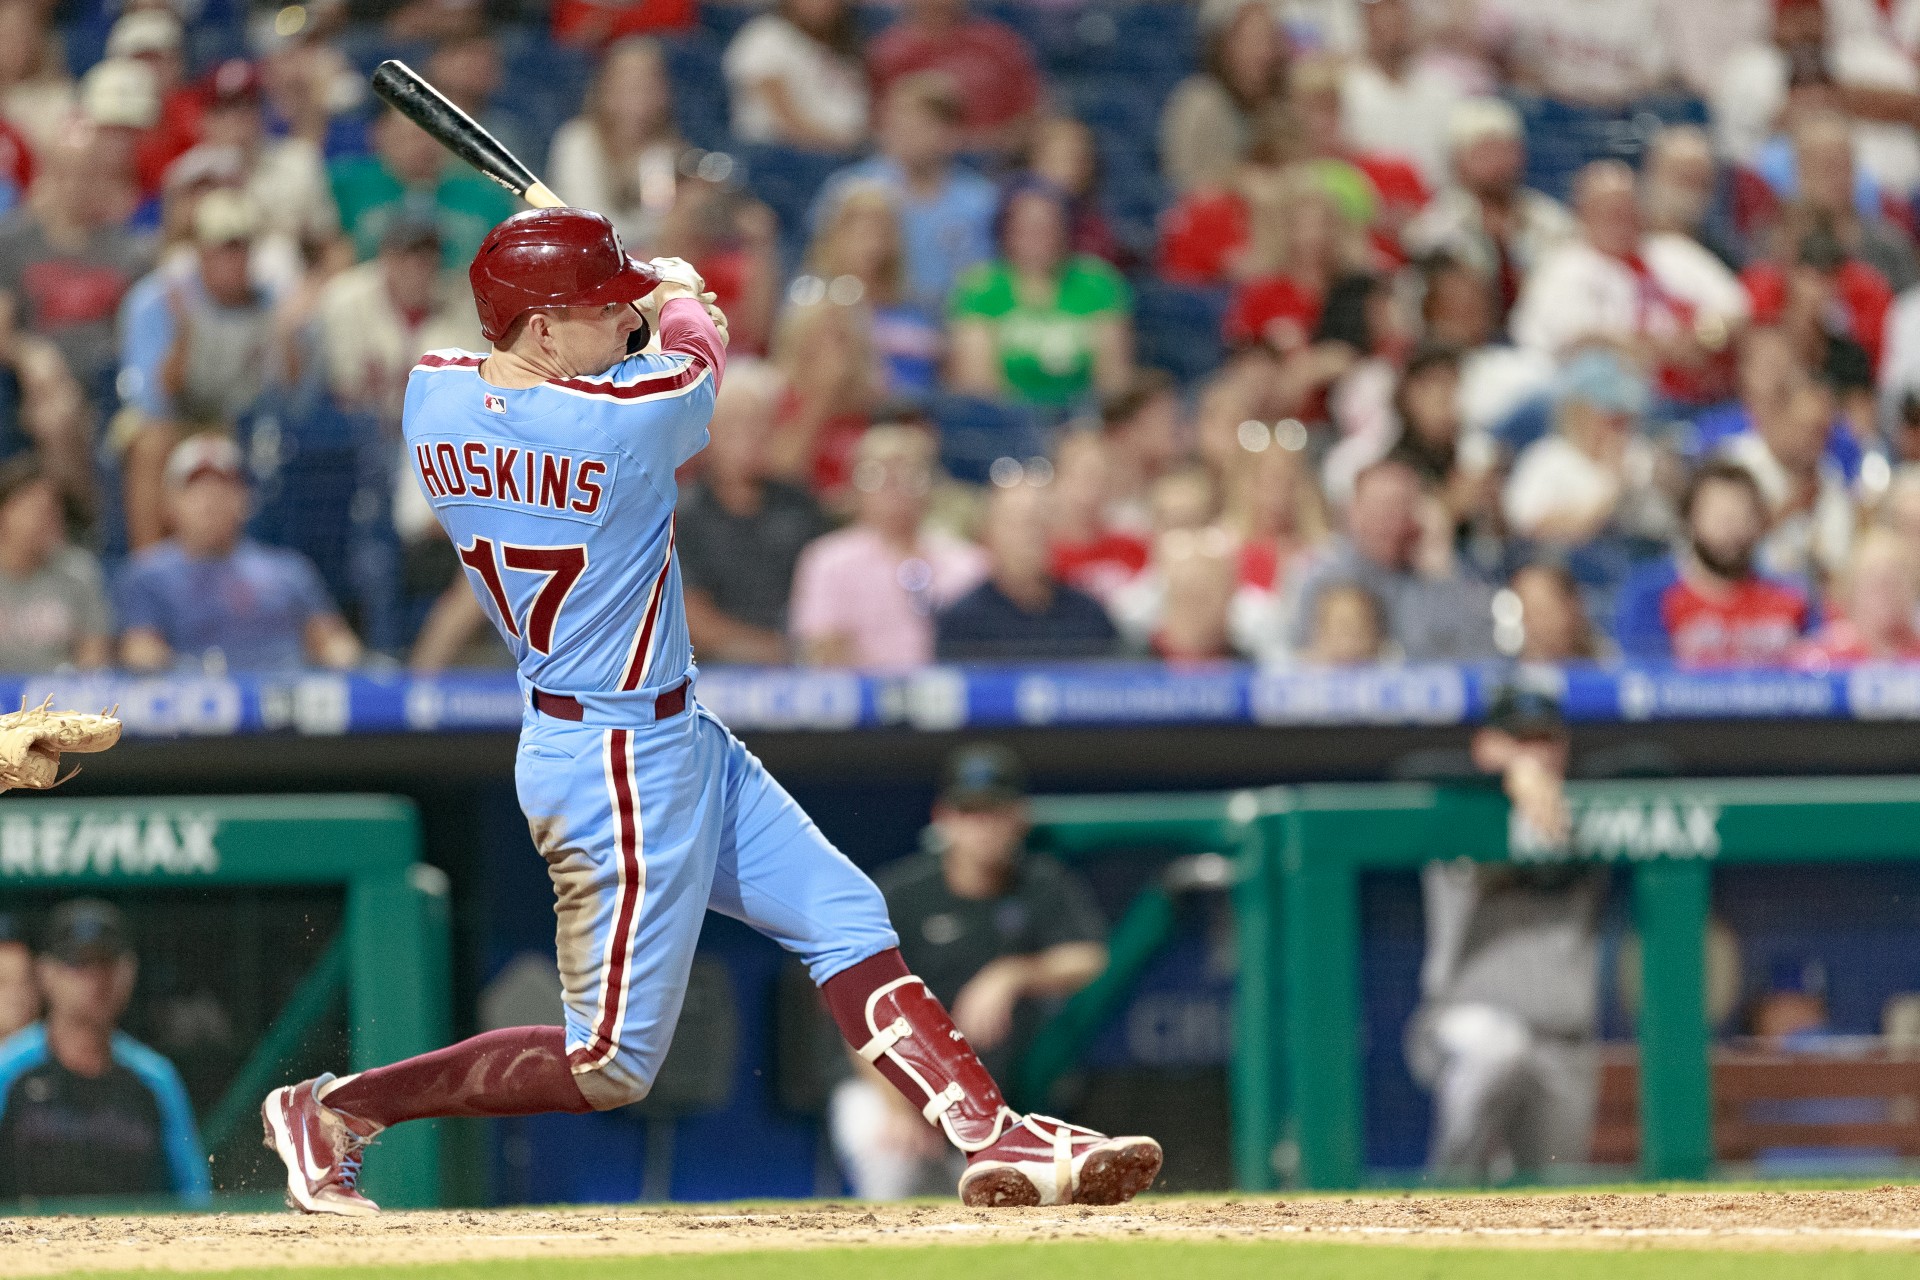 Rhys Hoskins drives in 4 after lengthy delay to sweep Nationals  Phillies  Nation - Your source for Philadelphia Phillies news, opinion, history,  rumors, events, and other fun stuff.